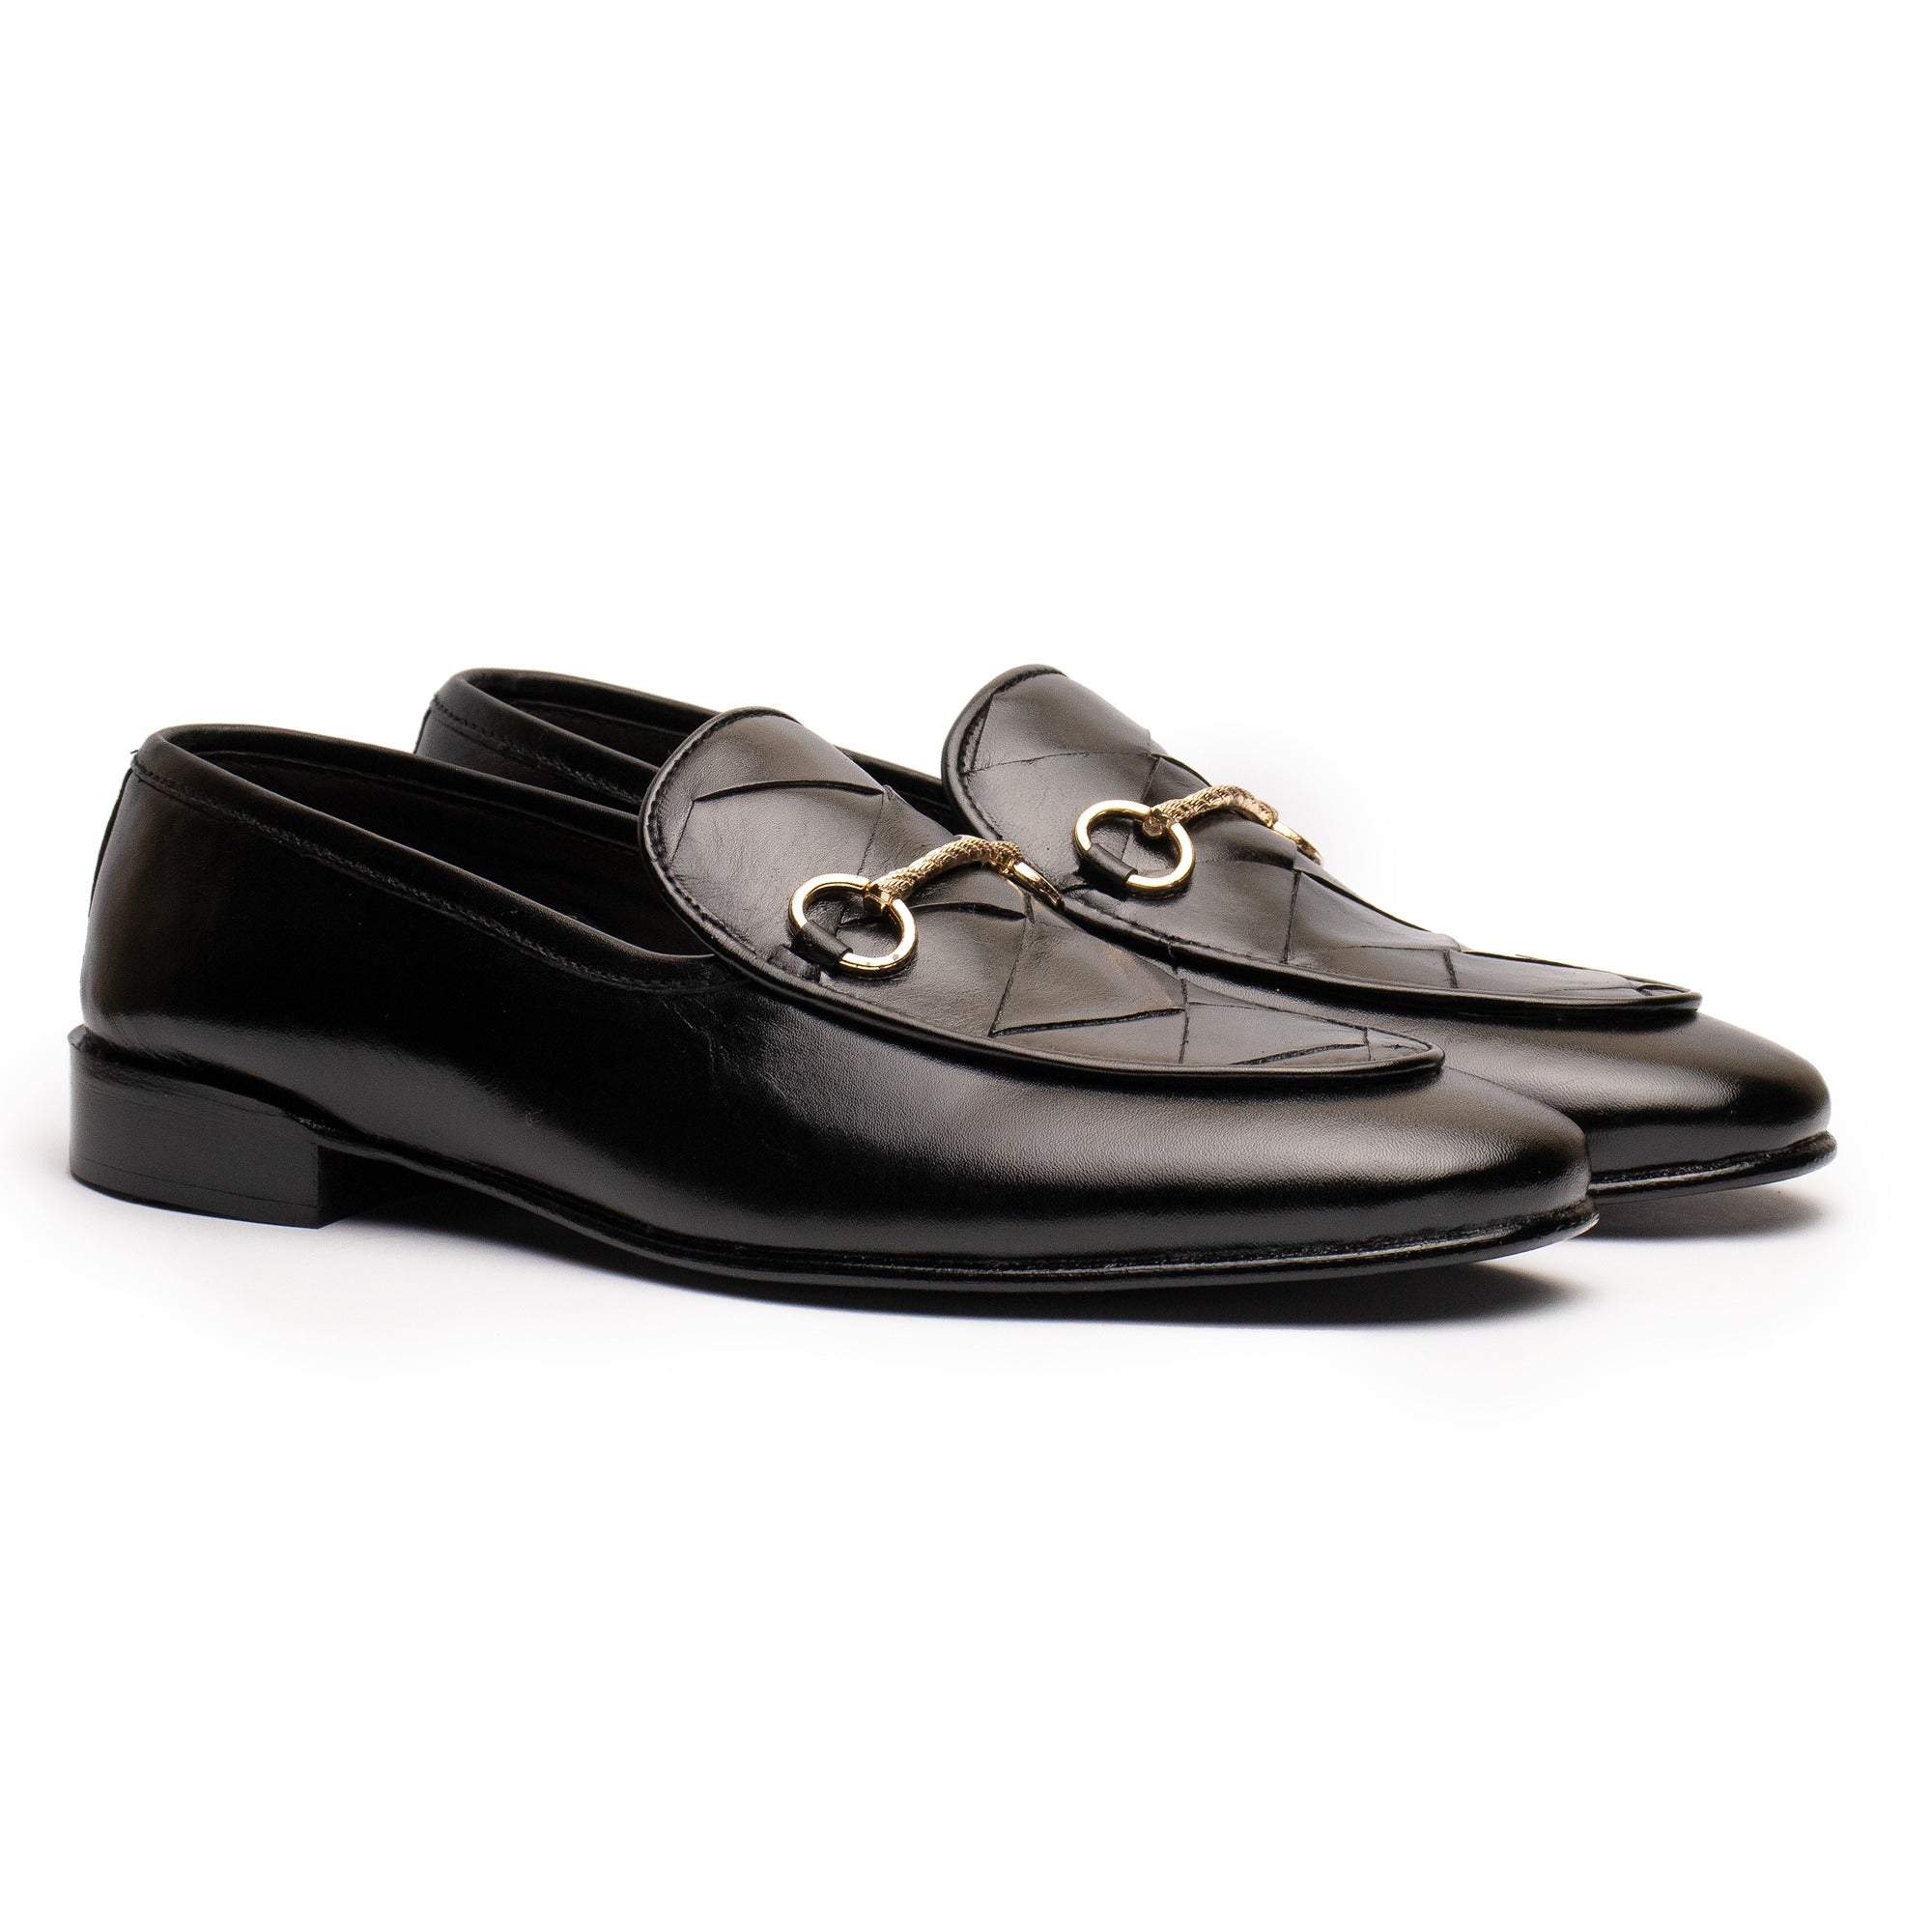 G-Welt - Premium shoes from royalstepshops - Just Rs.8400! Shop now at ROYAL STEP